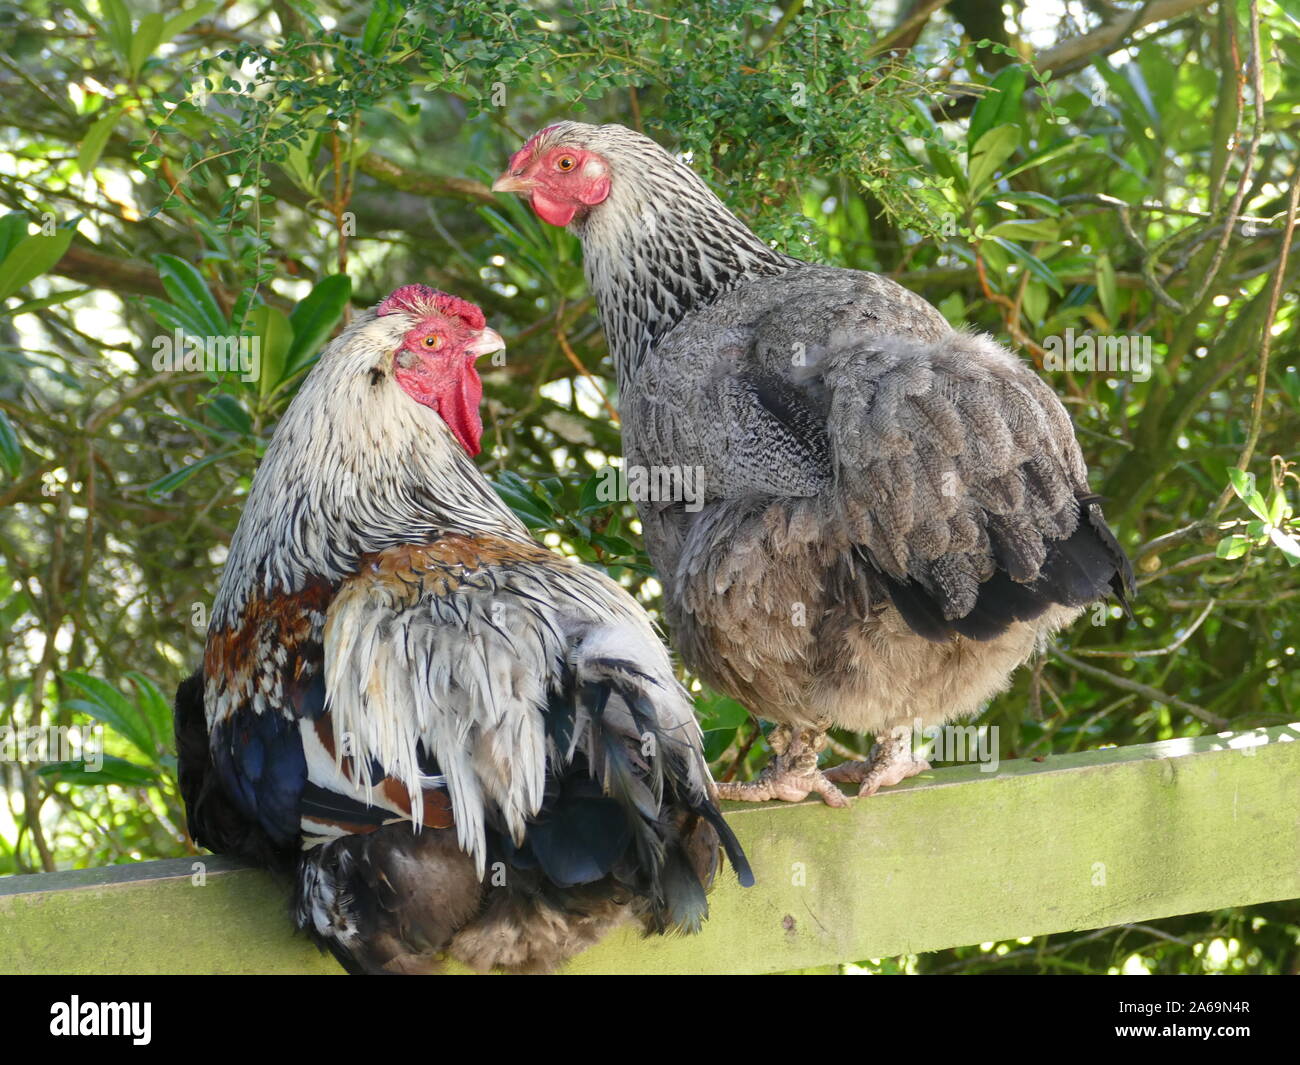 Two Chickens Perched on a Fence Stock Photo